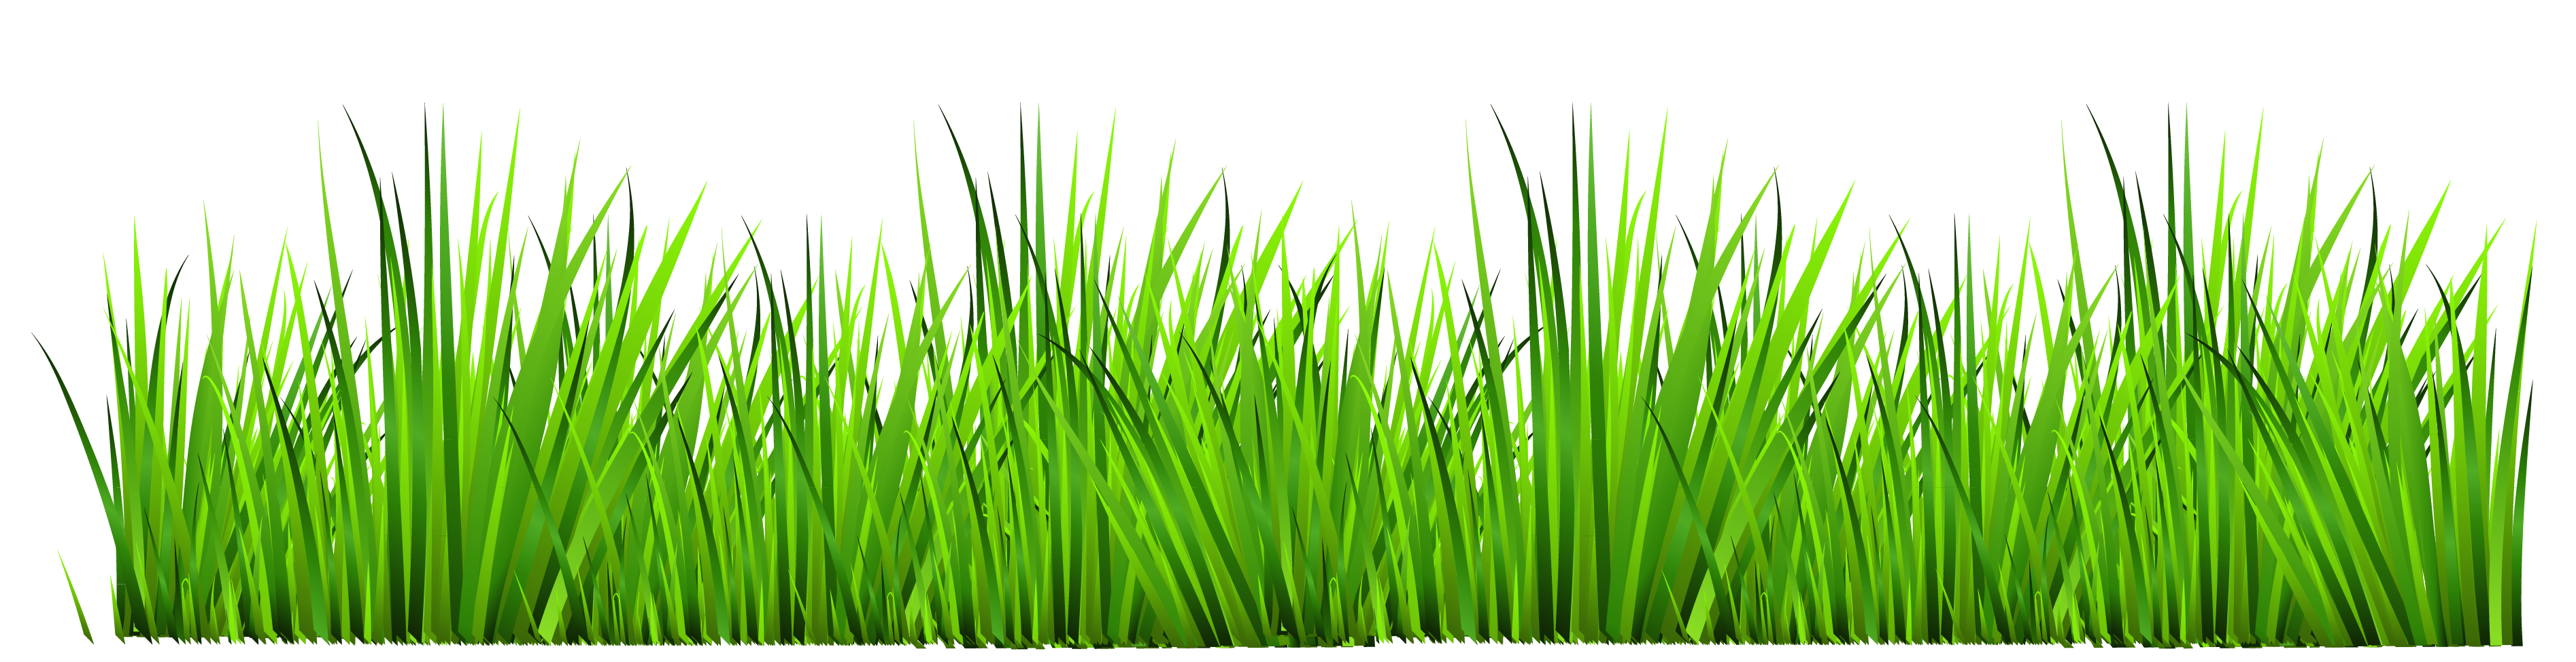 Free cliparts download clip. Grass vector png